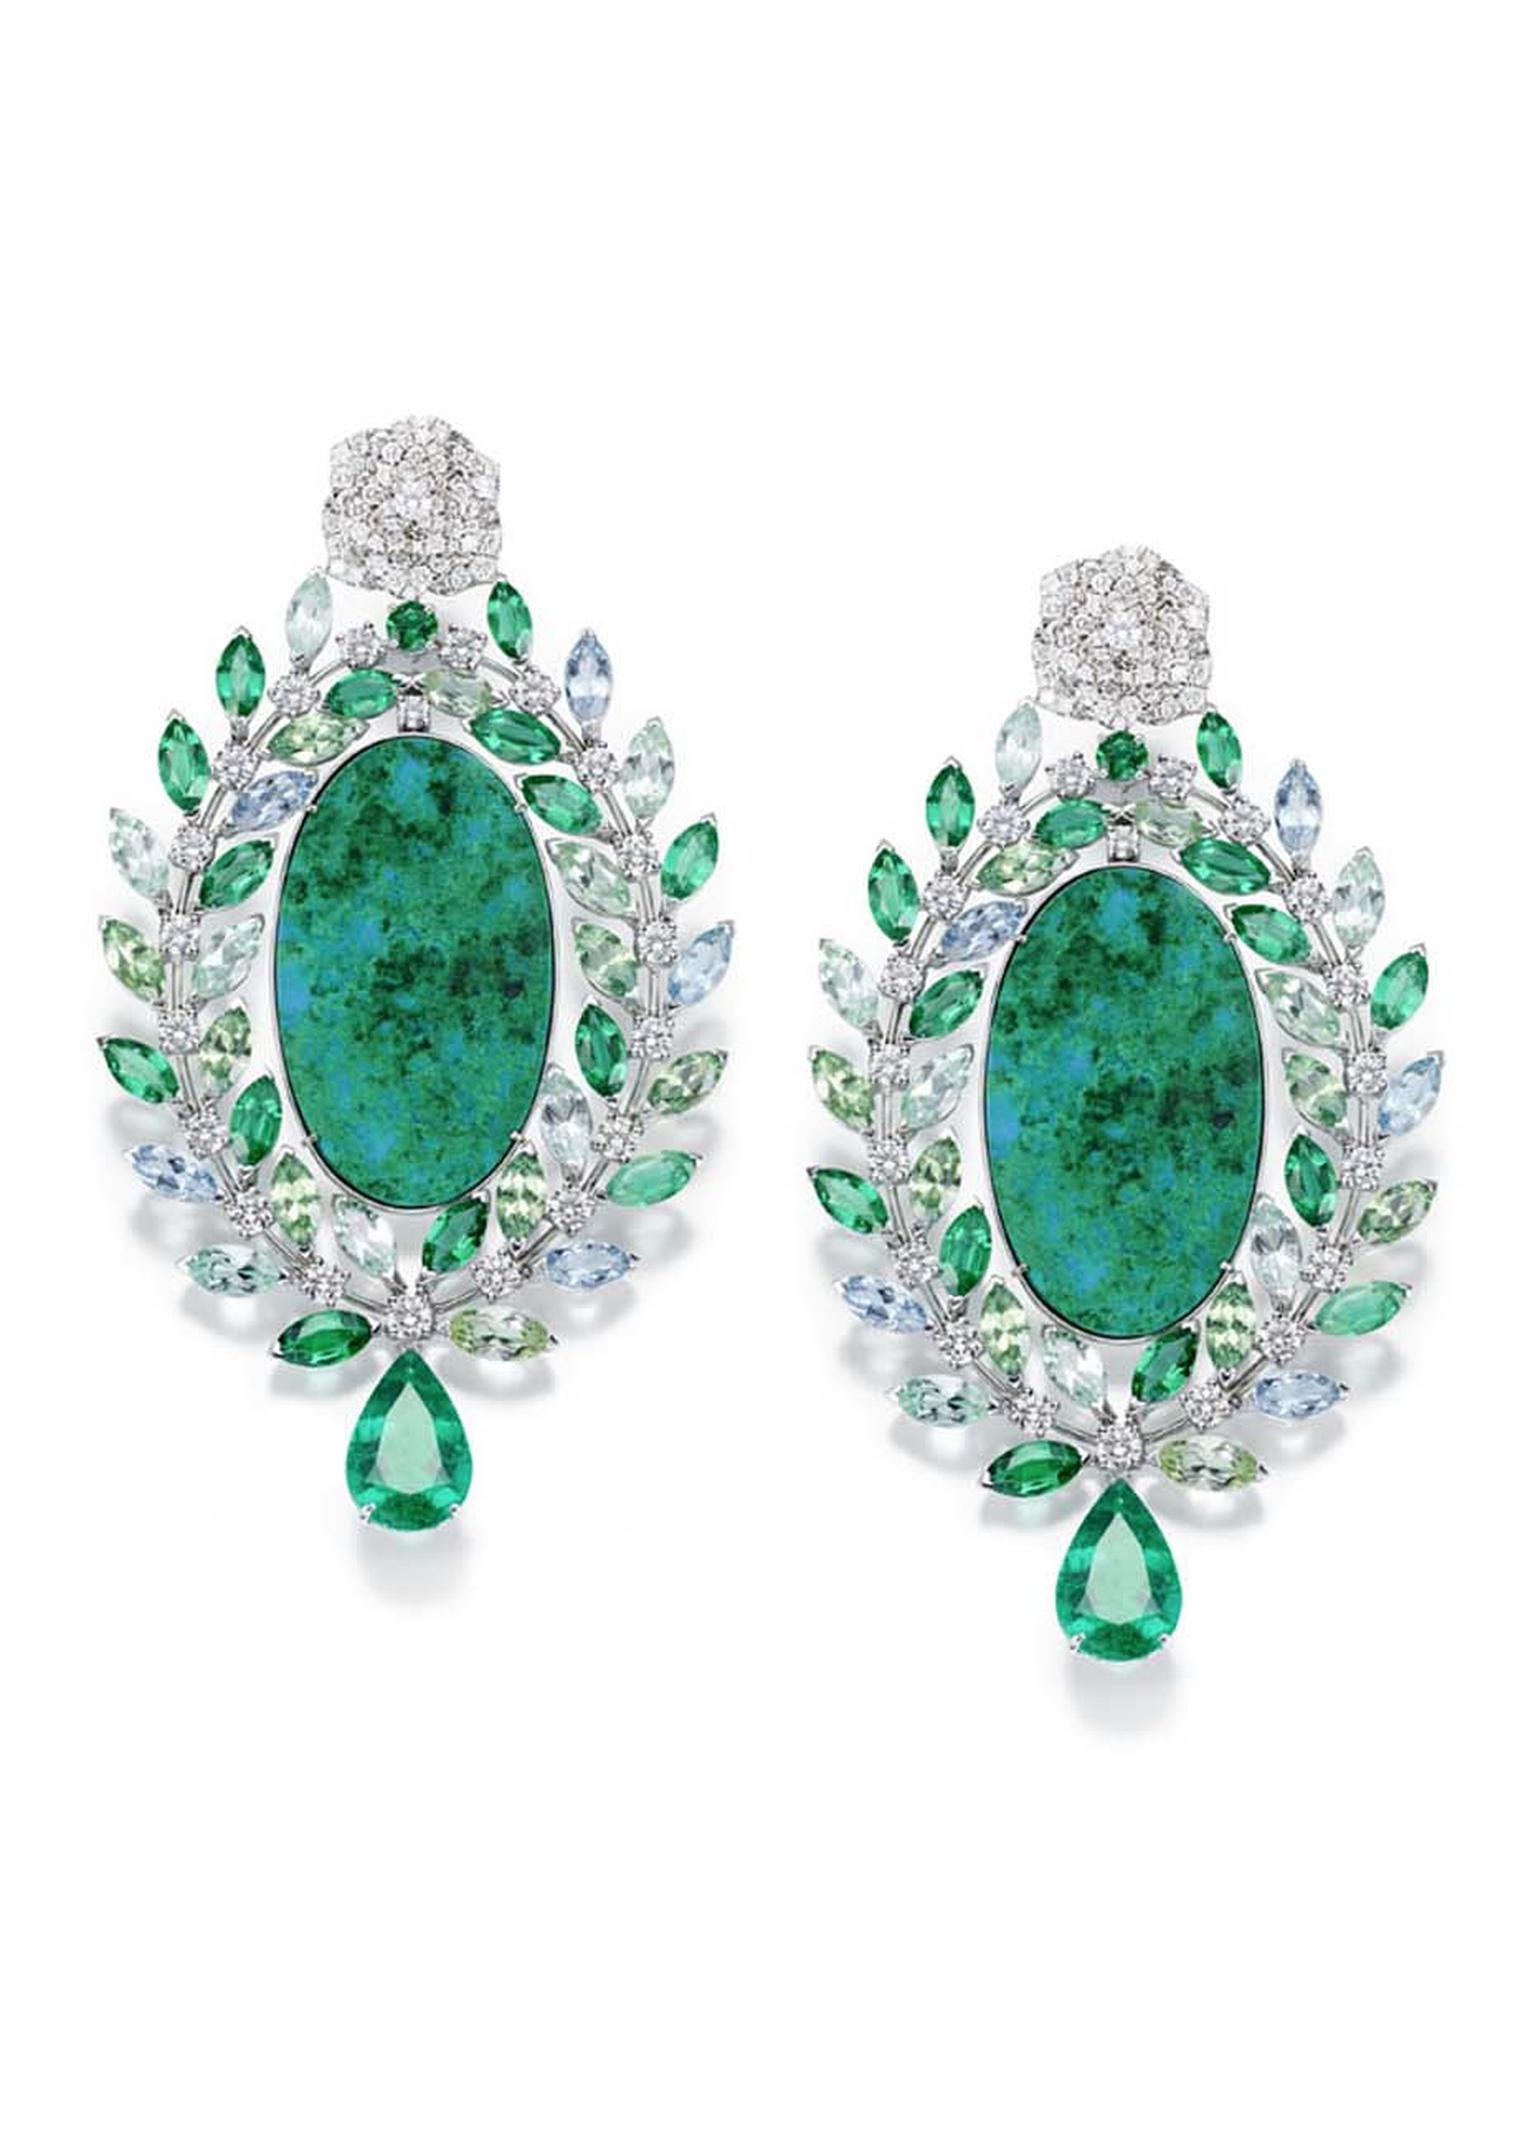 Piaget Rose Passion earrings in white gold, with diamonds and tourmalines